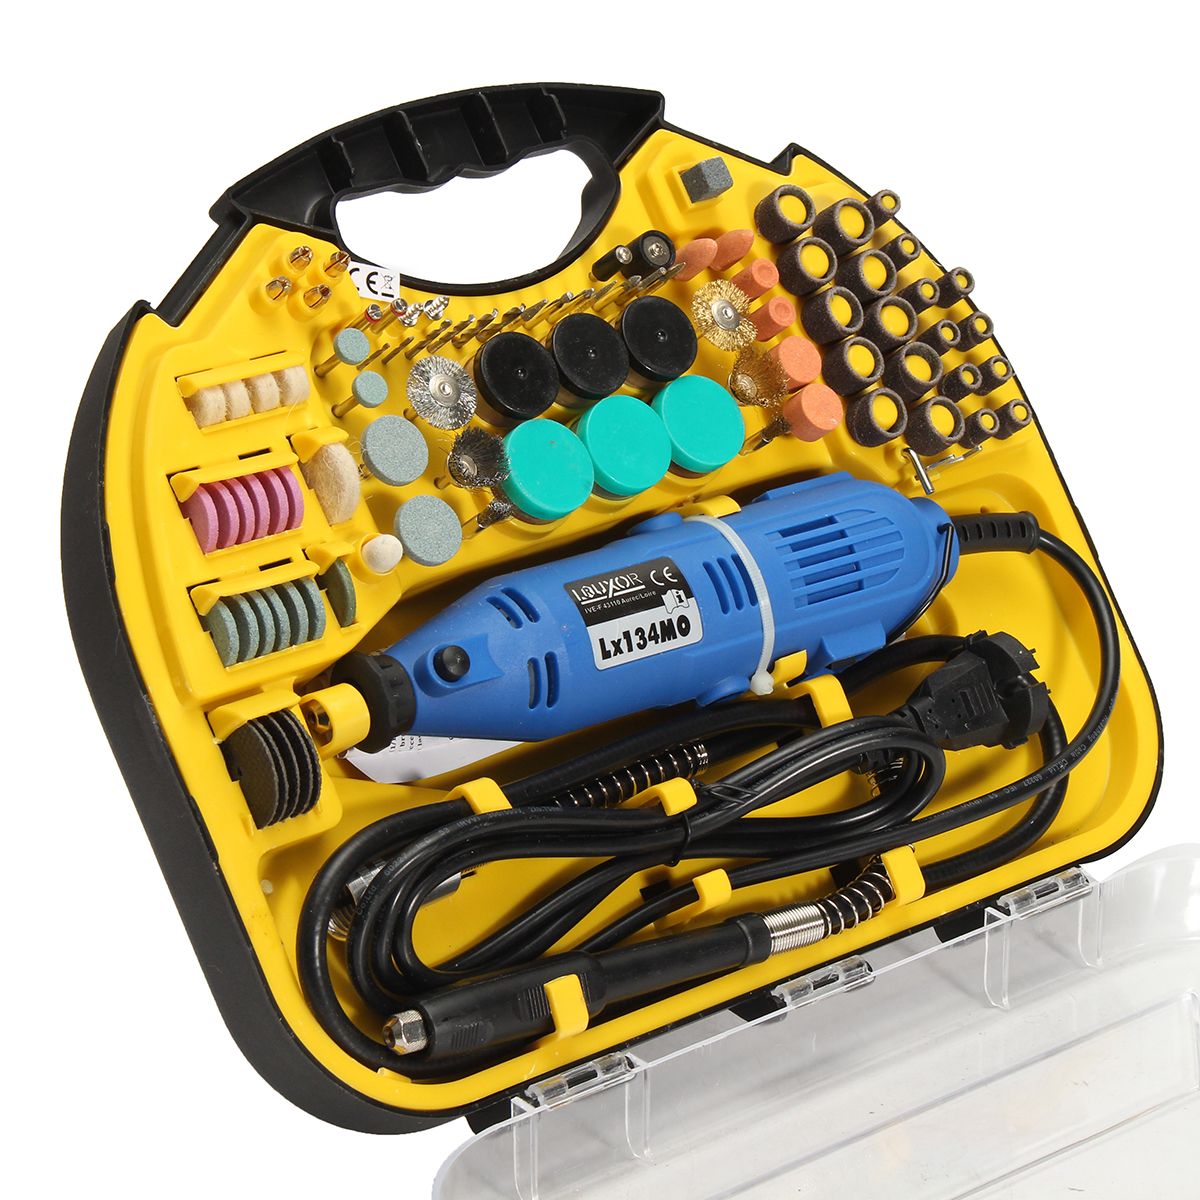 Drillpro-AC-220V-Electric-Rotary-Drill-Grinder-Engraver-Polisher-DIY-Tool-Electric-Drill-Set-1119049